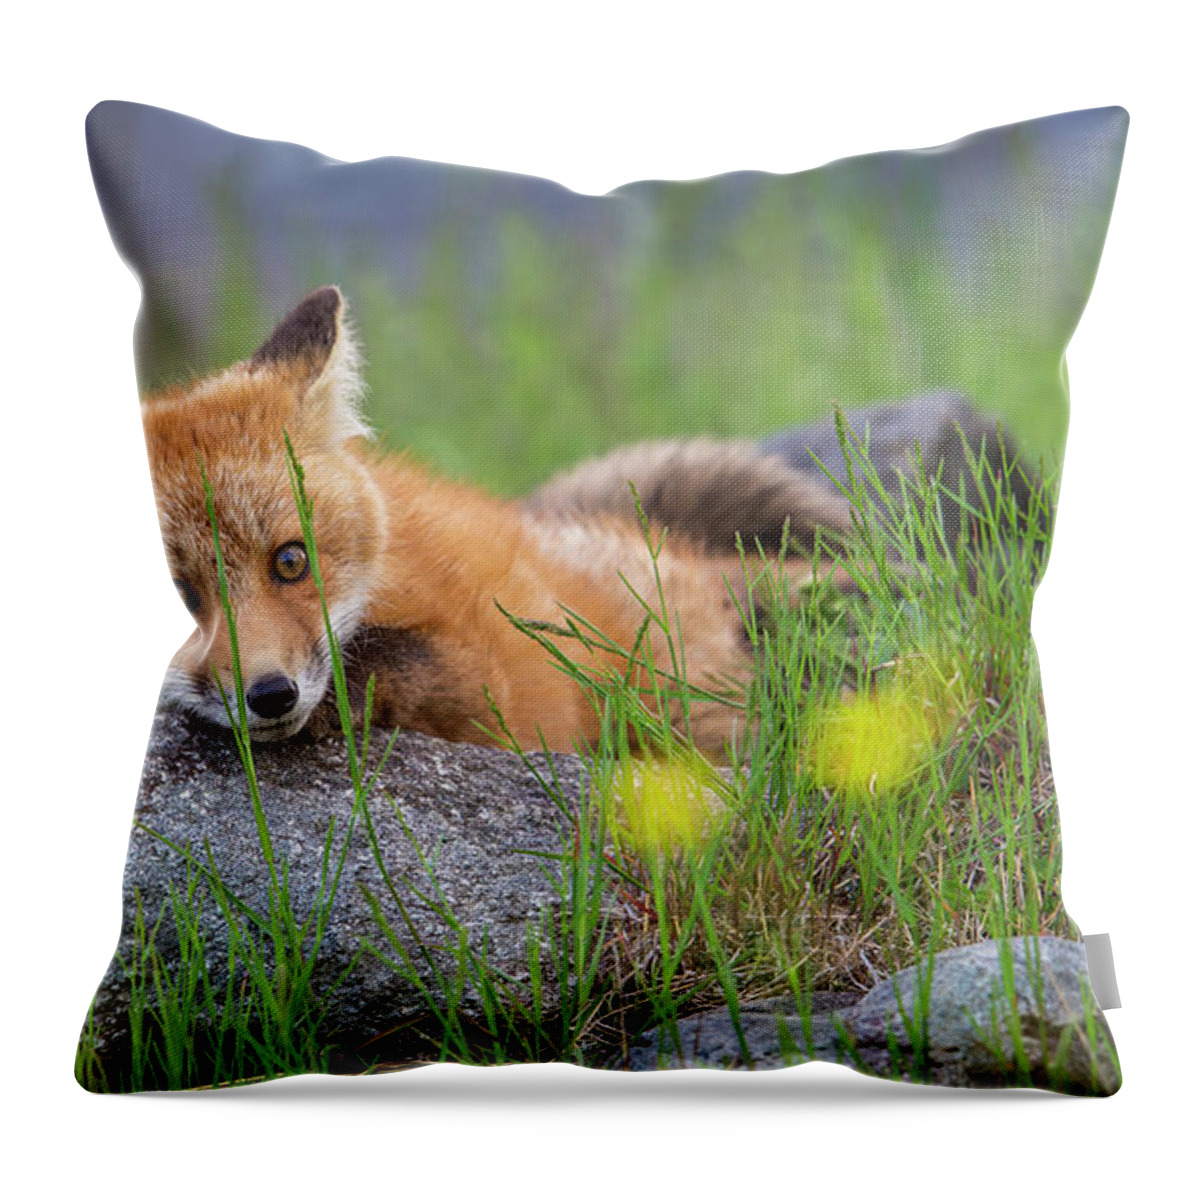 Sugar Throw Pillow featuring the photograph Sugar Hill Fox Resting by White Mountain Images